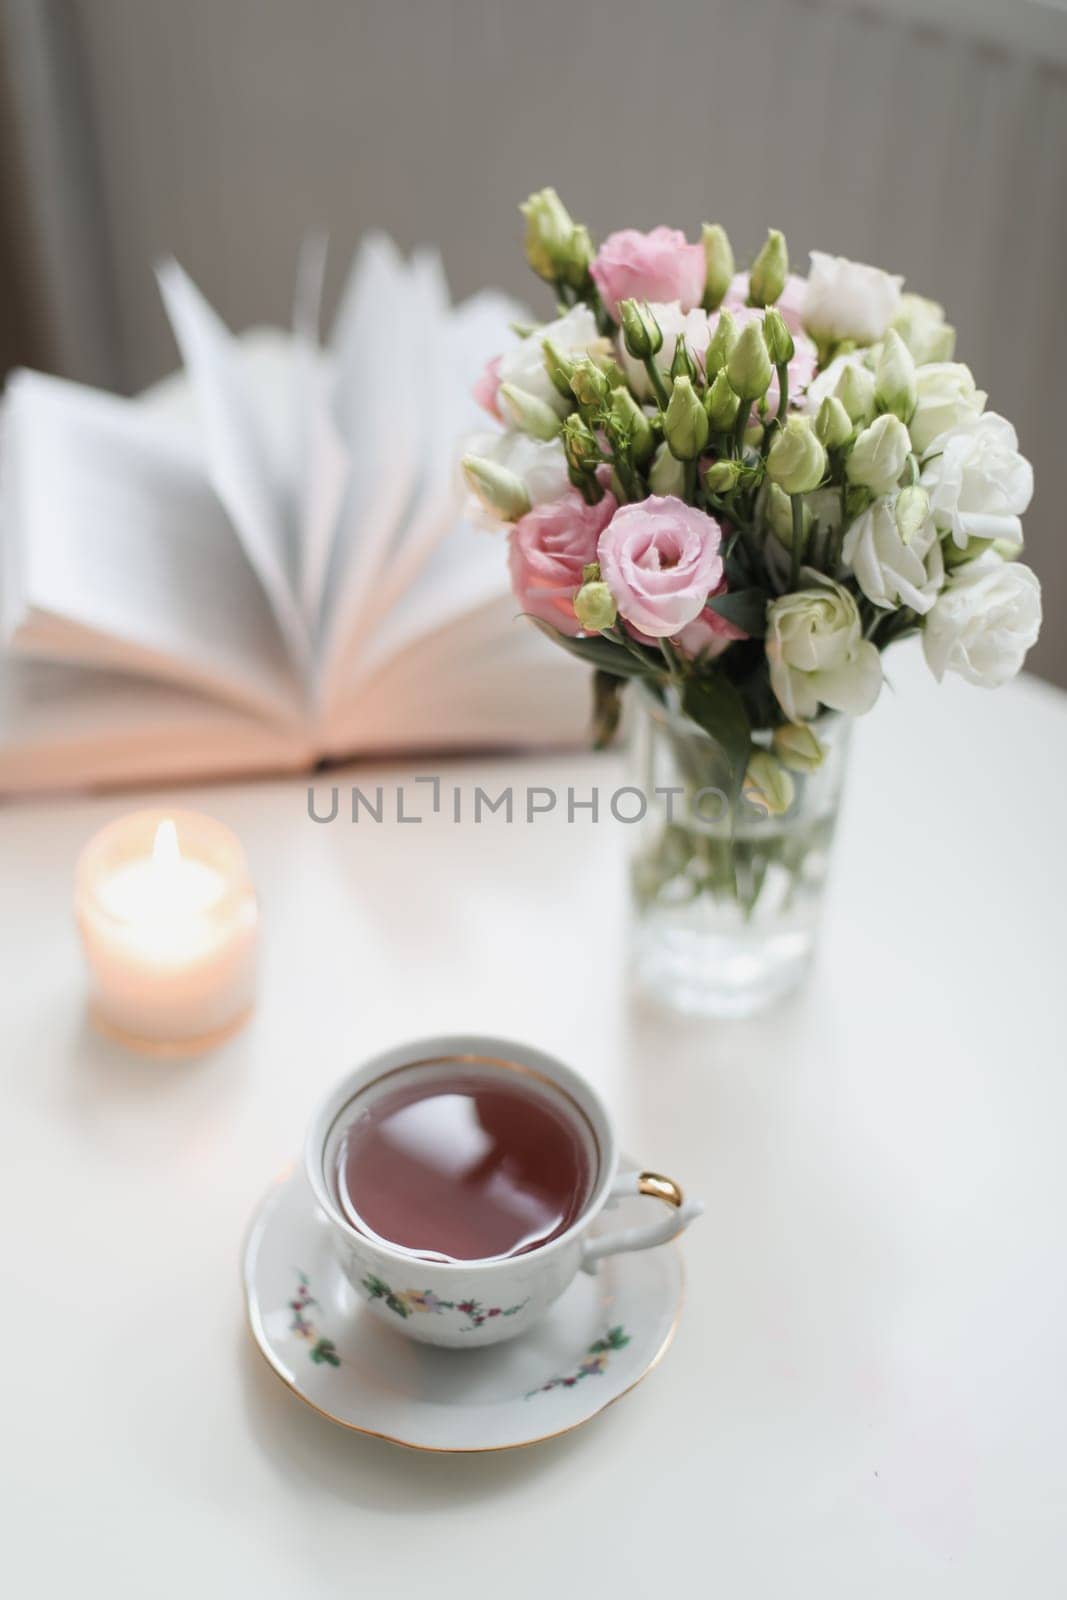 Romantic Spring still life. Romantic background with cup of tea, rose flowers and open book over white table